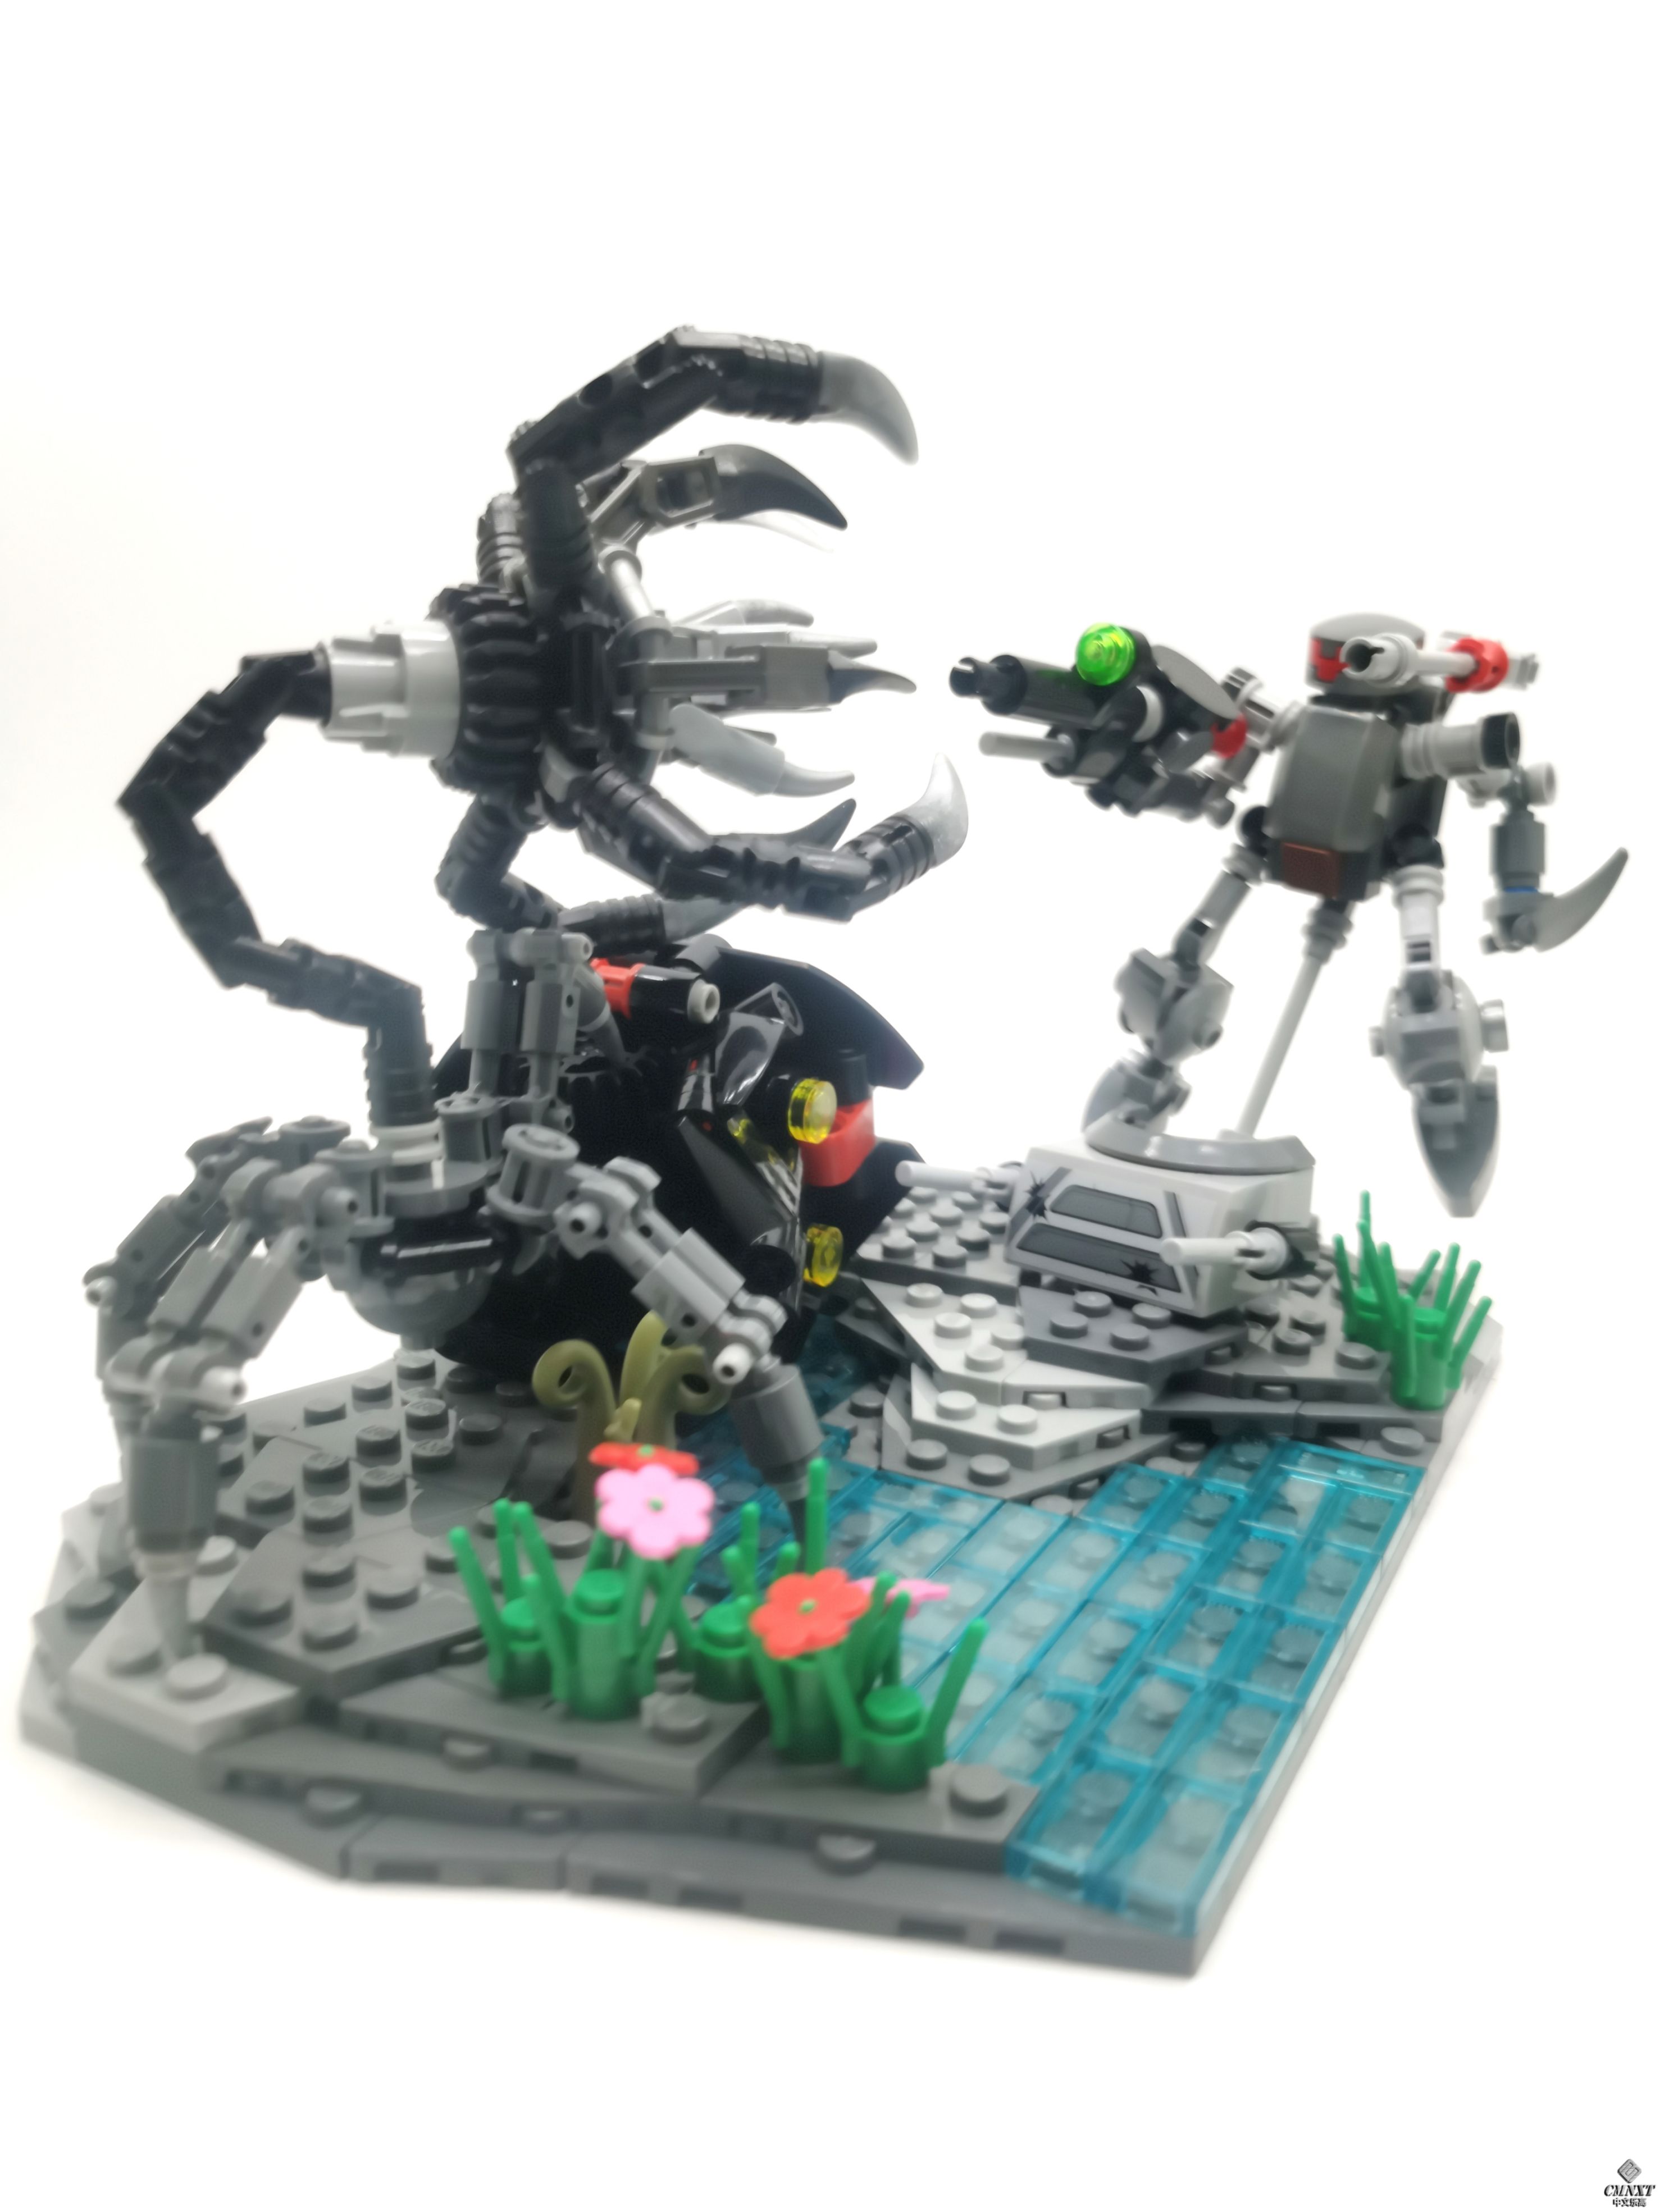 LEGO MOC 食人花的攻击 Attack of the corpse flower 02 small.jpg